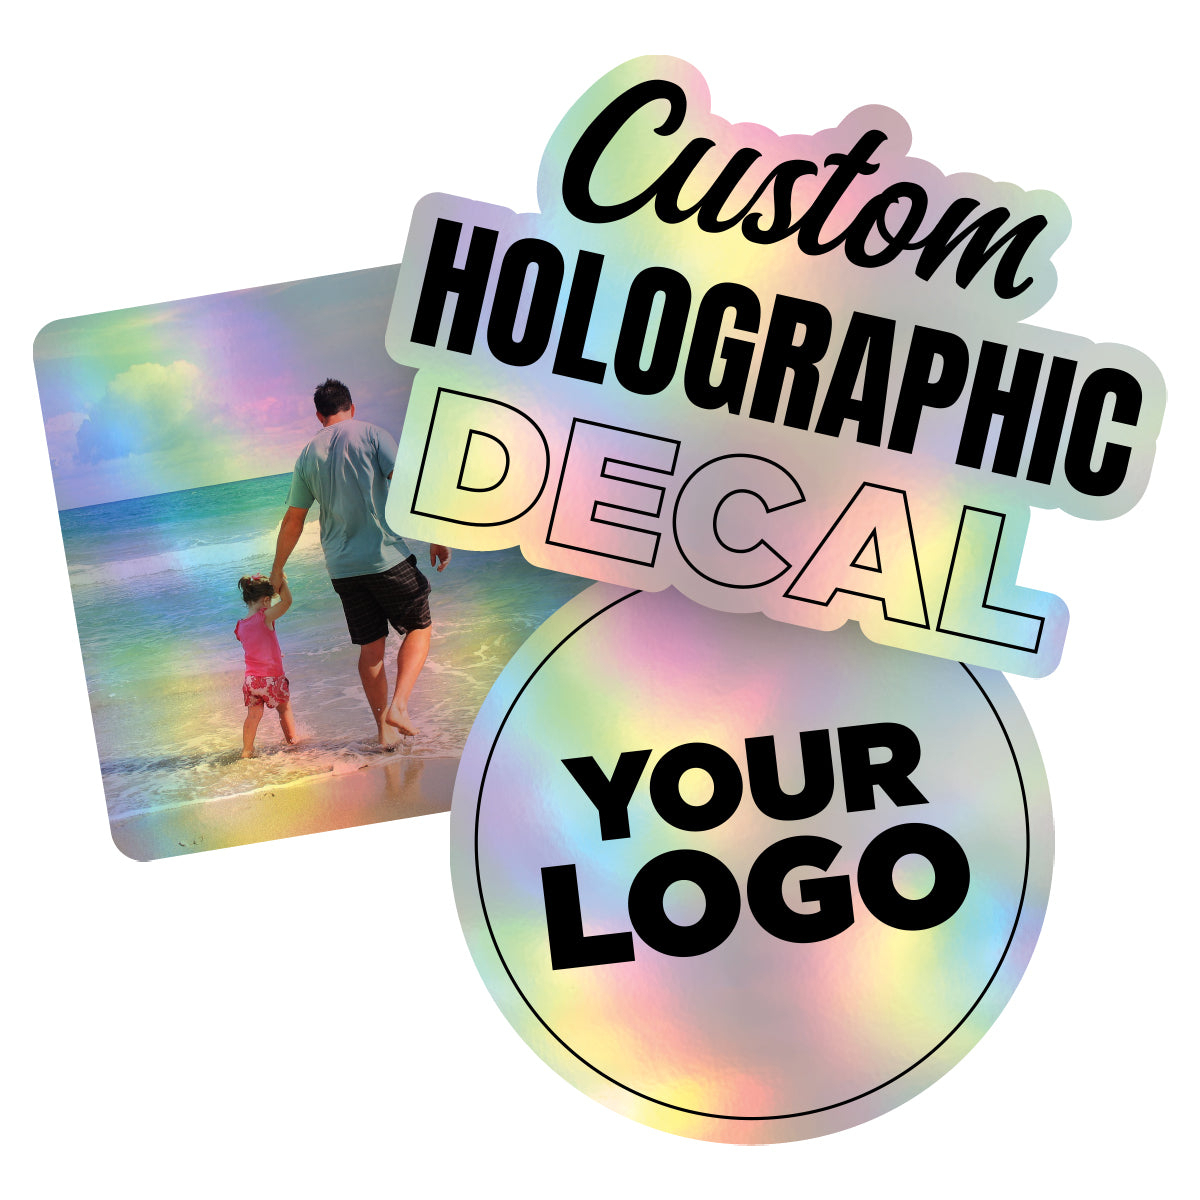 Personalized Holographic Vinyl Sticker Decal Custom Made Any Logo, Image, Text, Or Name Die Cut To Shape - Single, 6 Inch, Die Cut